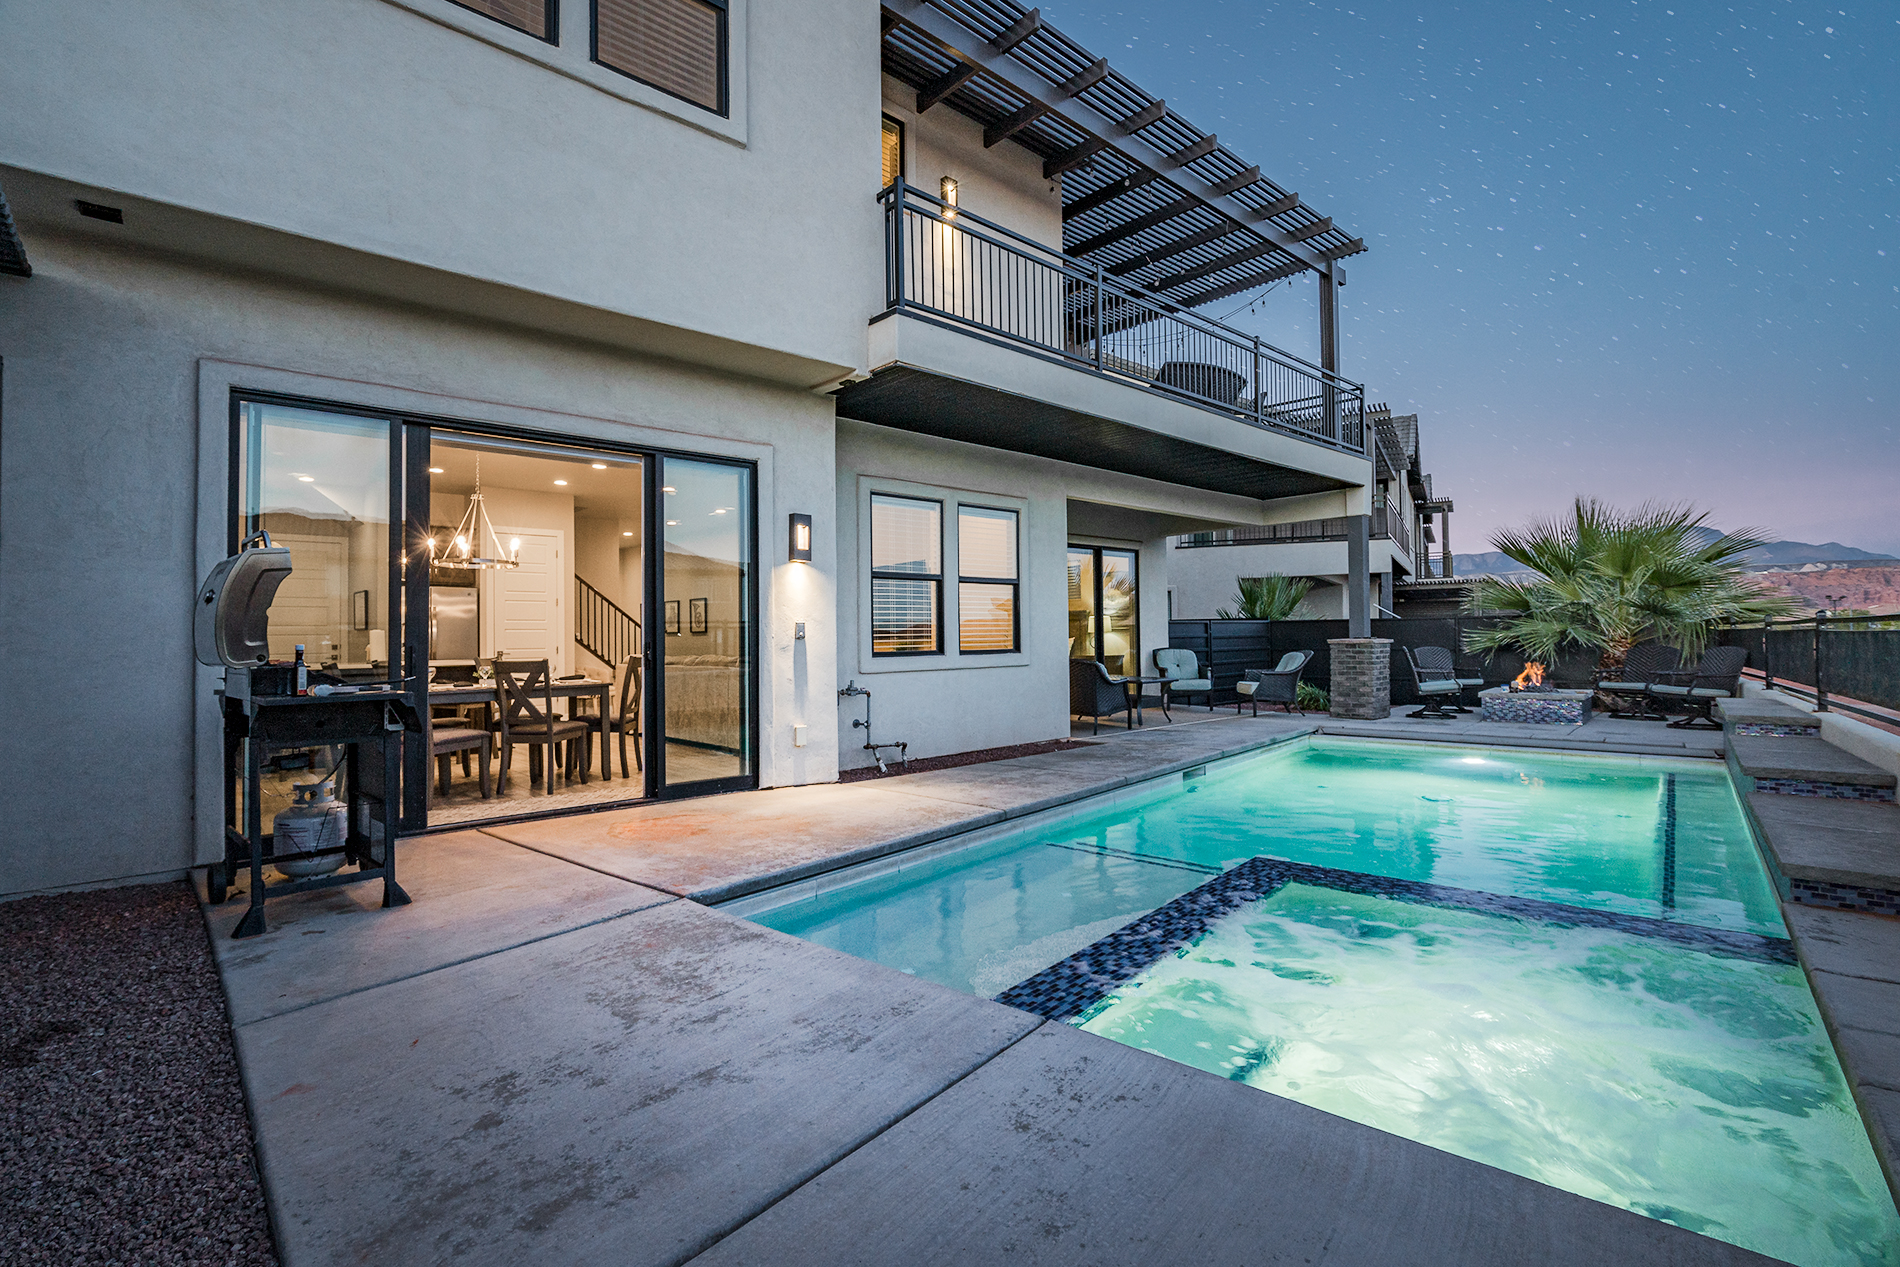 61| Poolhouse Haven at Ocotillo Springs with Private Hot Tub